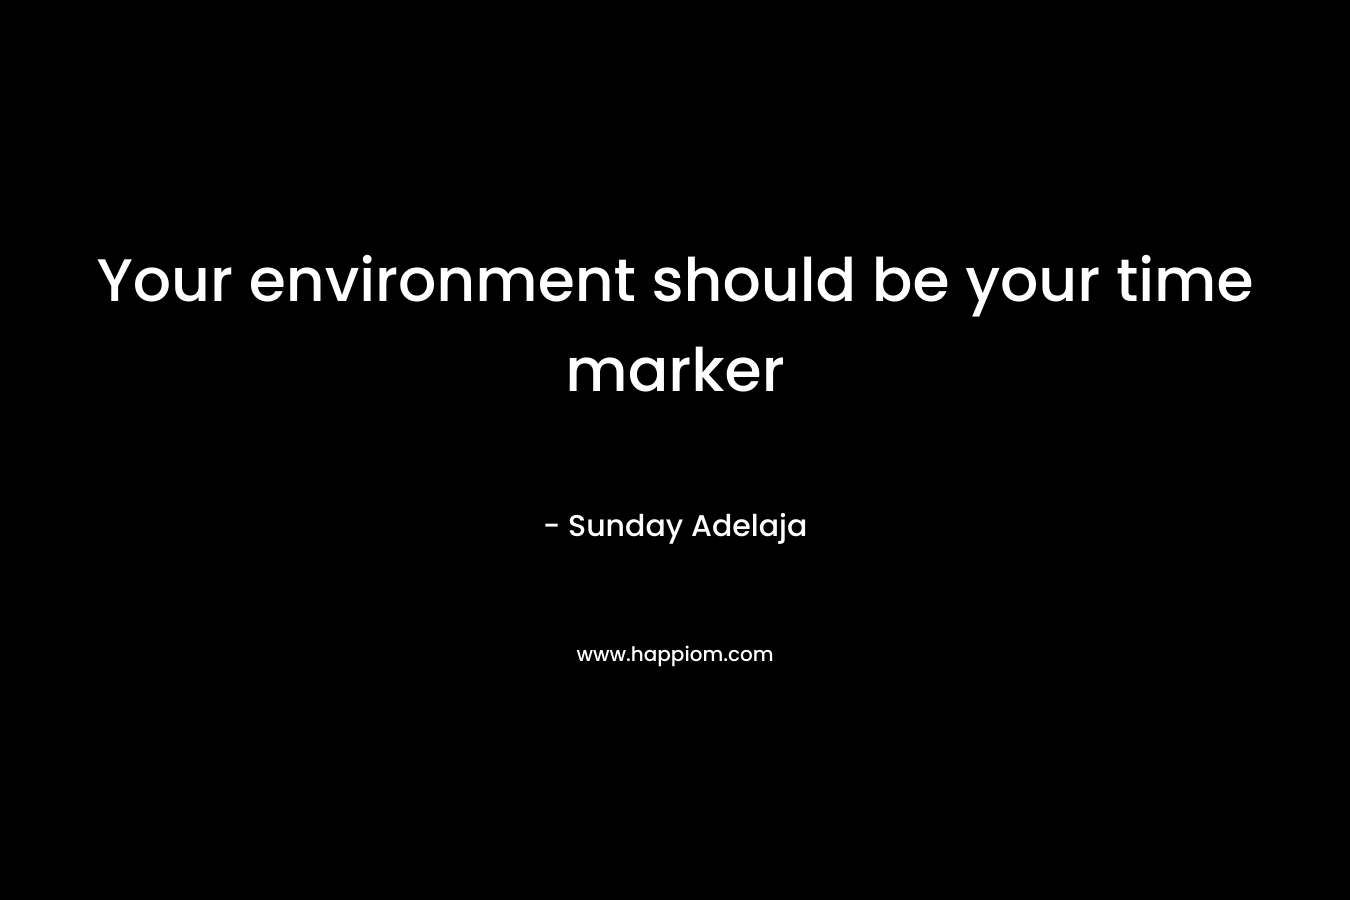 Your environment should be your time marker